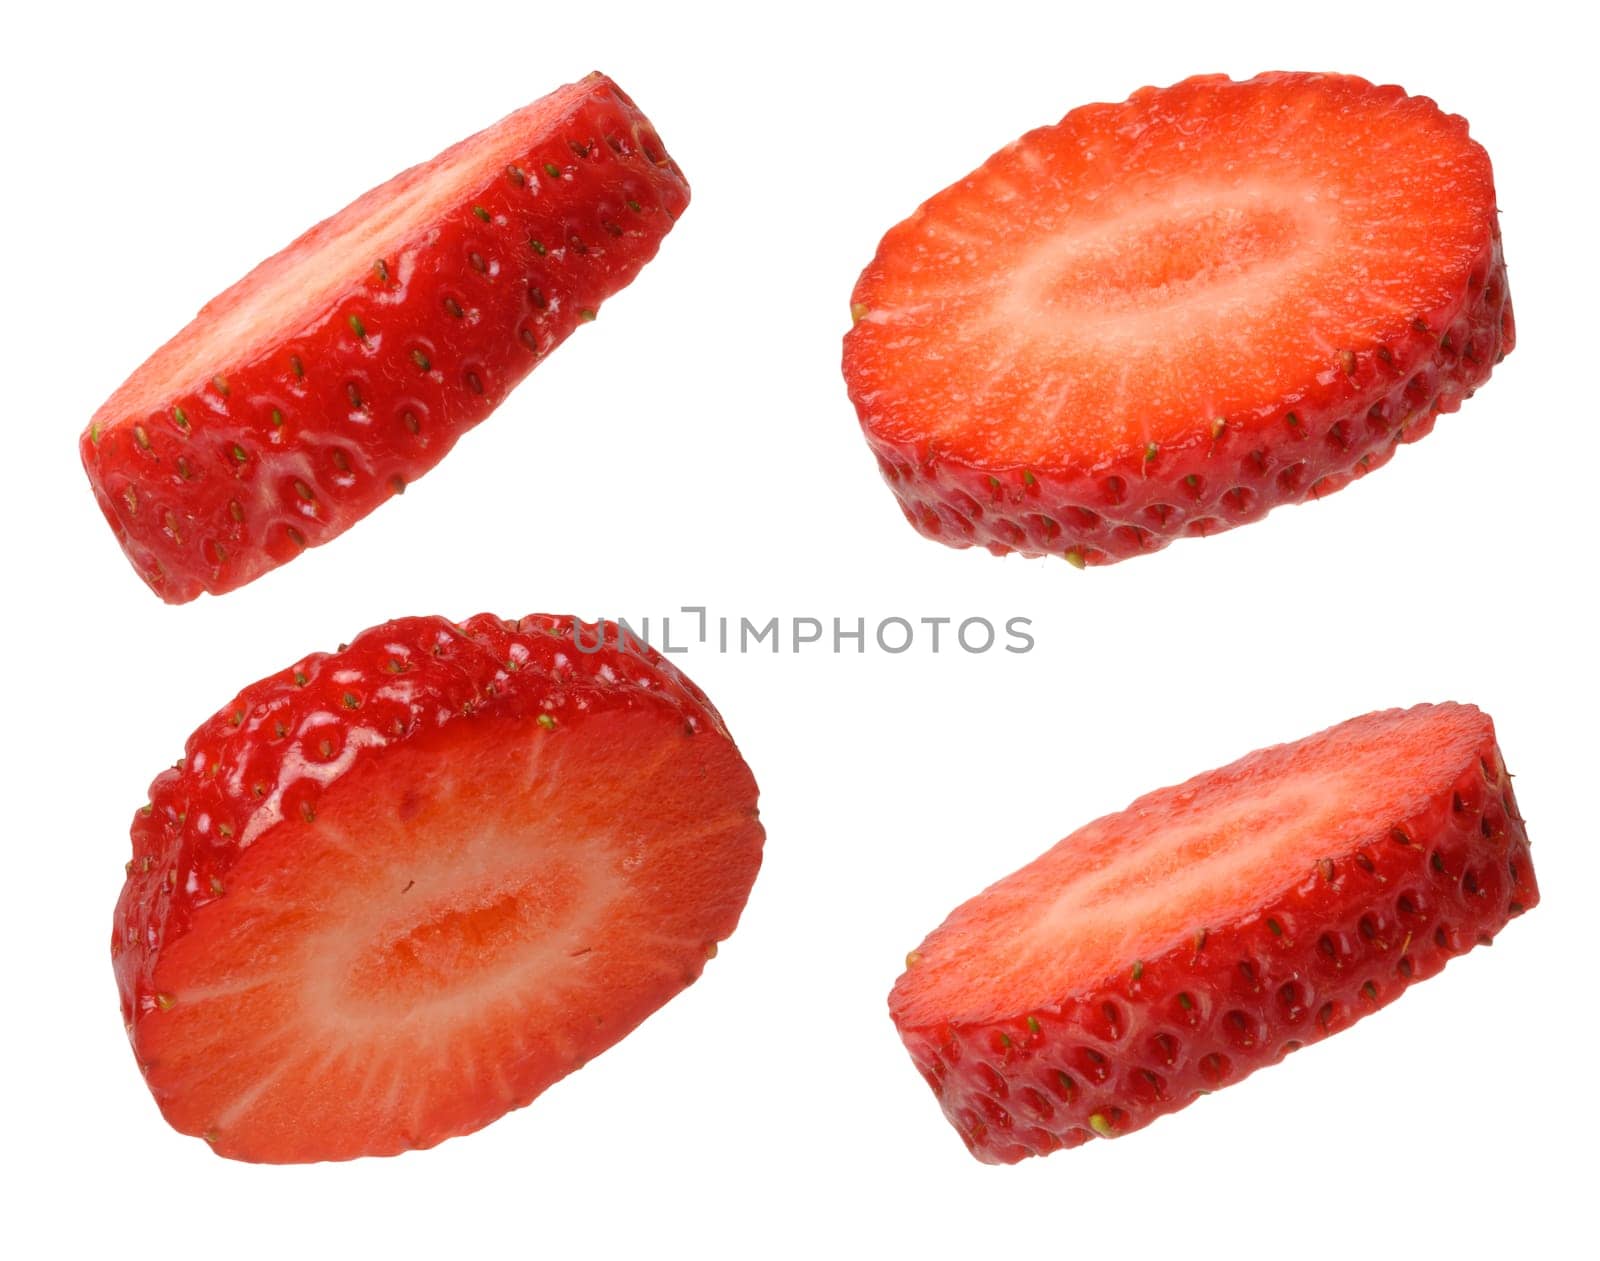 Pieces of ripe red strawberries on isolated background, set